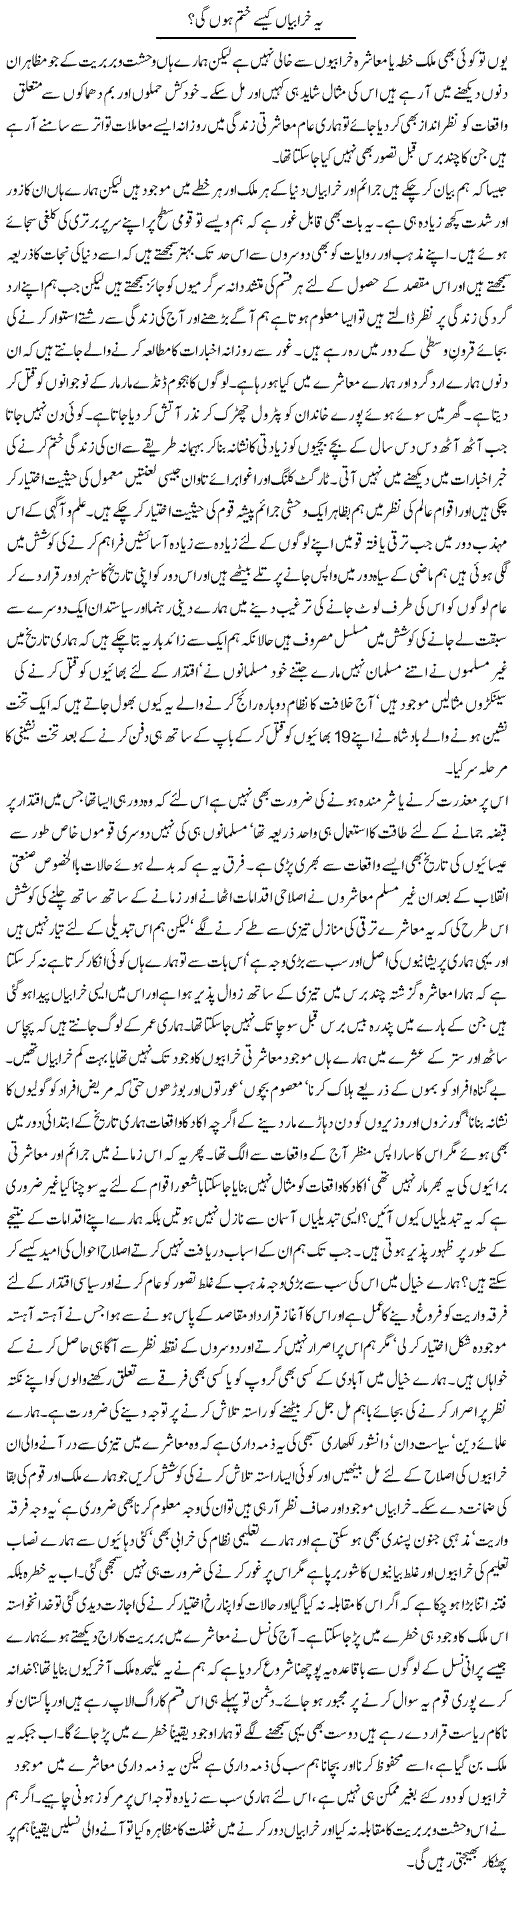 Problems of Muslims Express Column Hameed Akhtar 11 March 2011